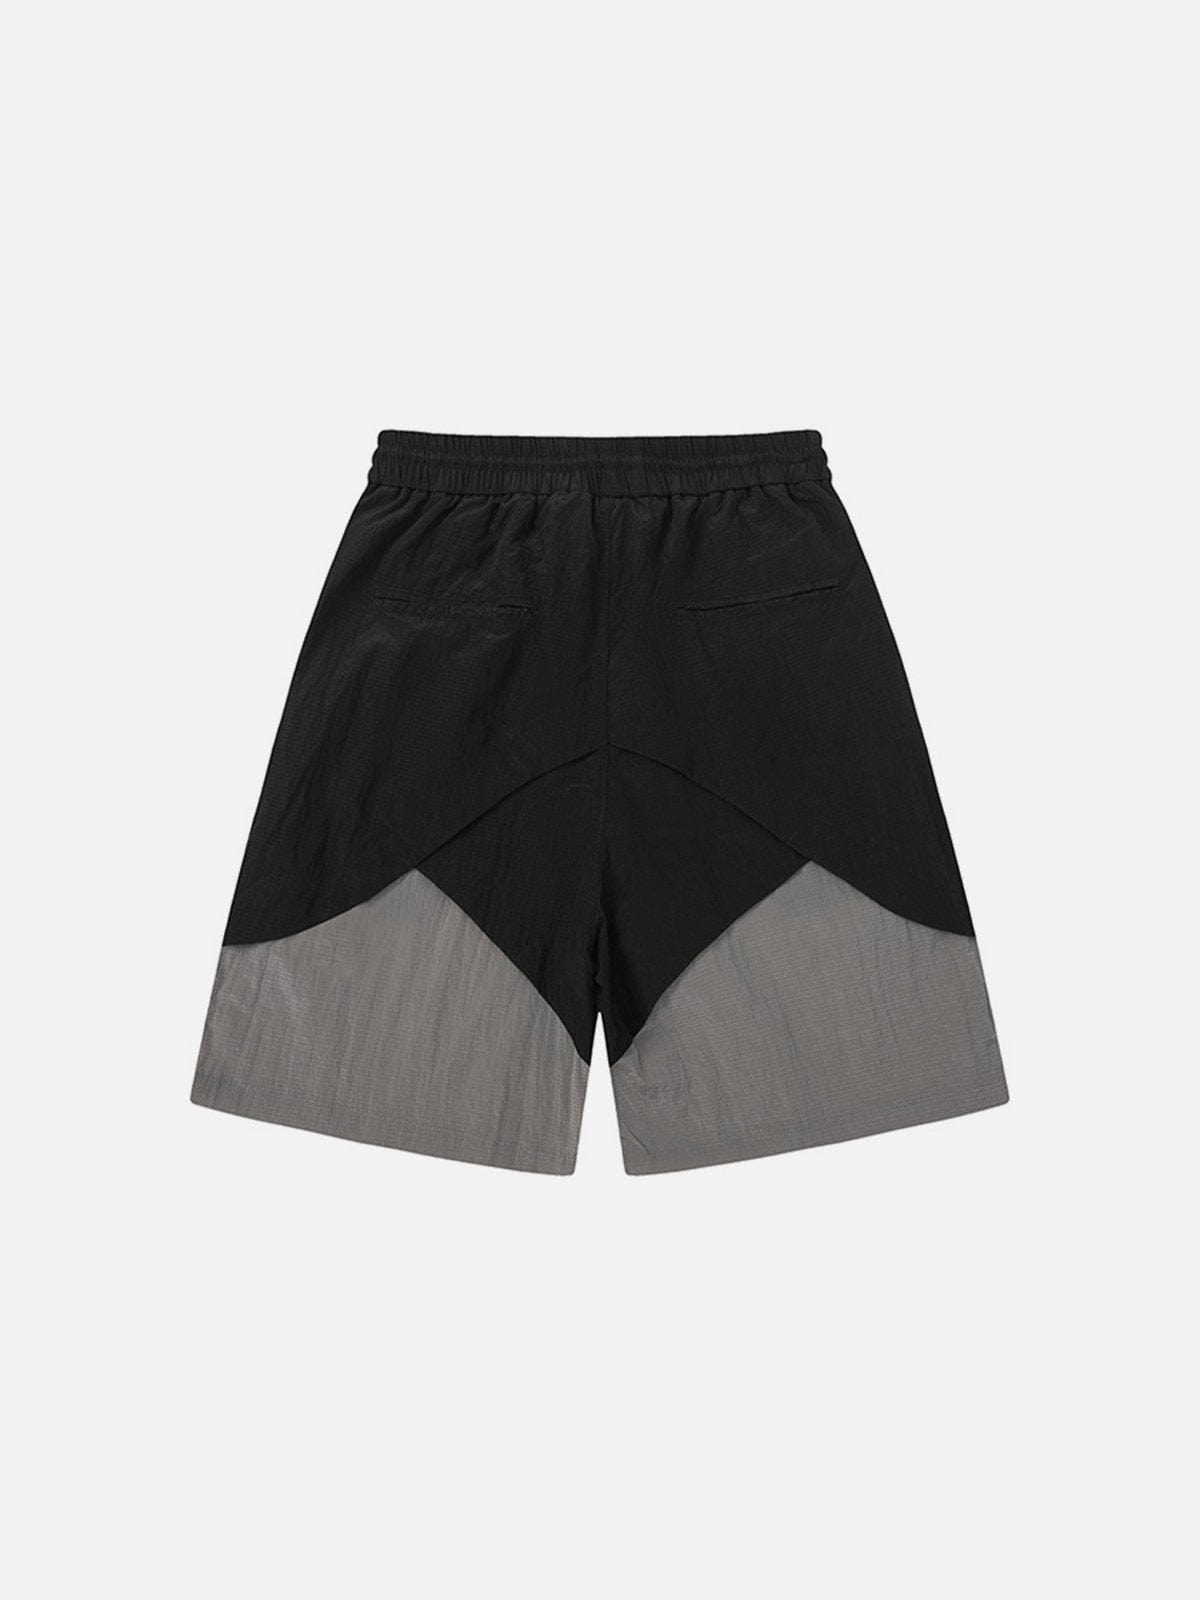 NEV Deconstructed Material Patchwork Shorts